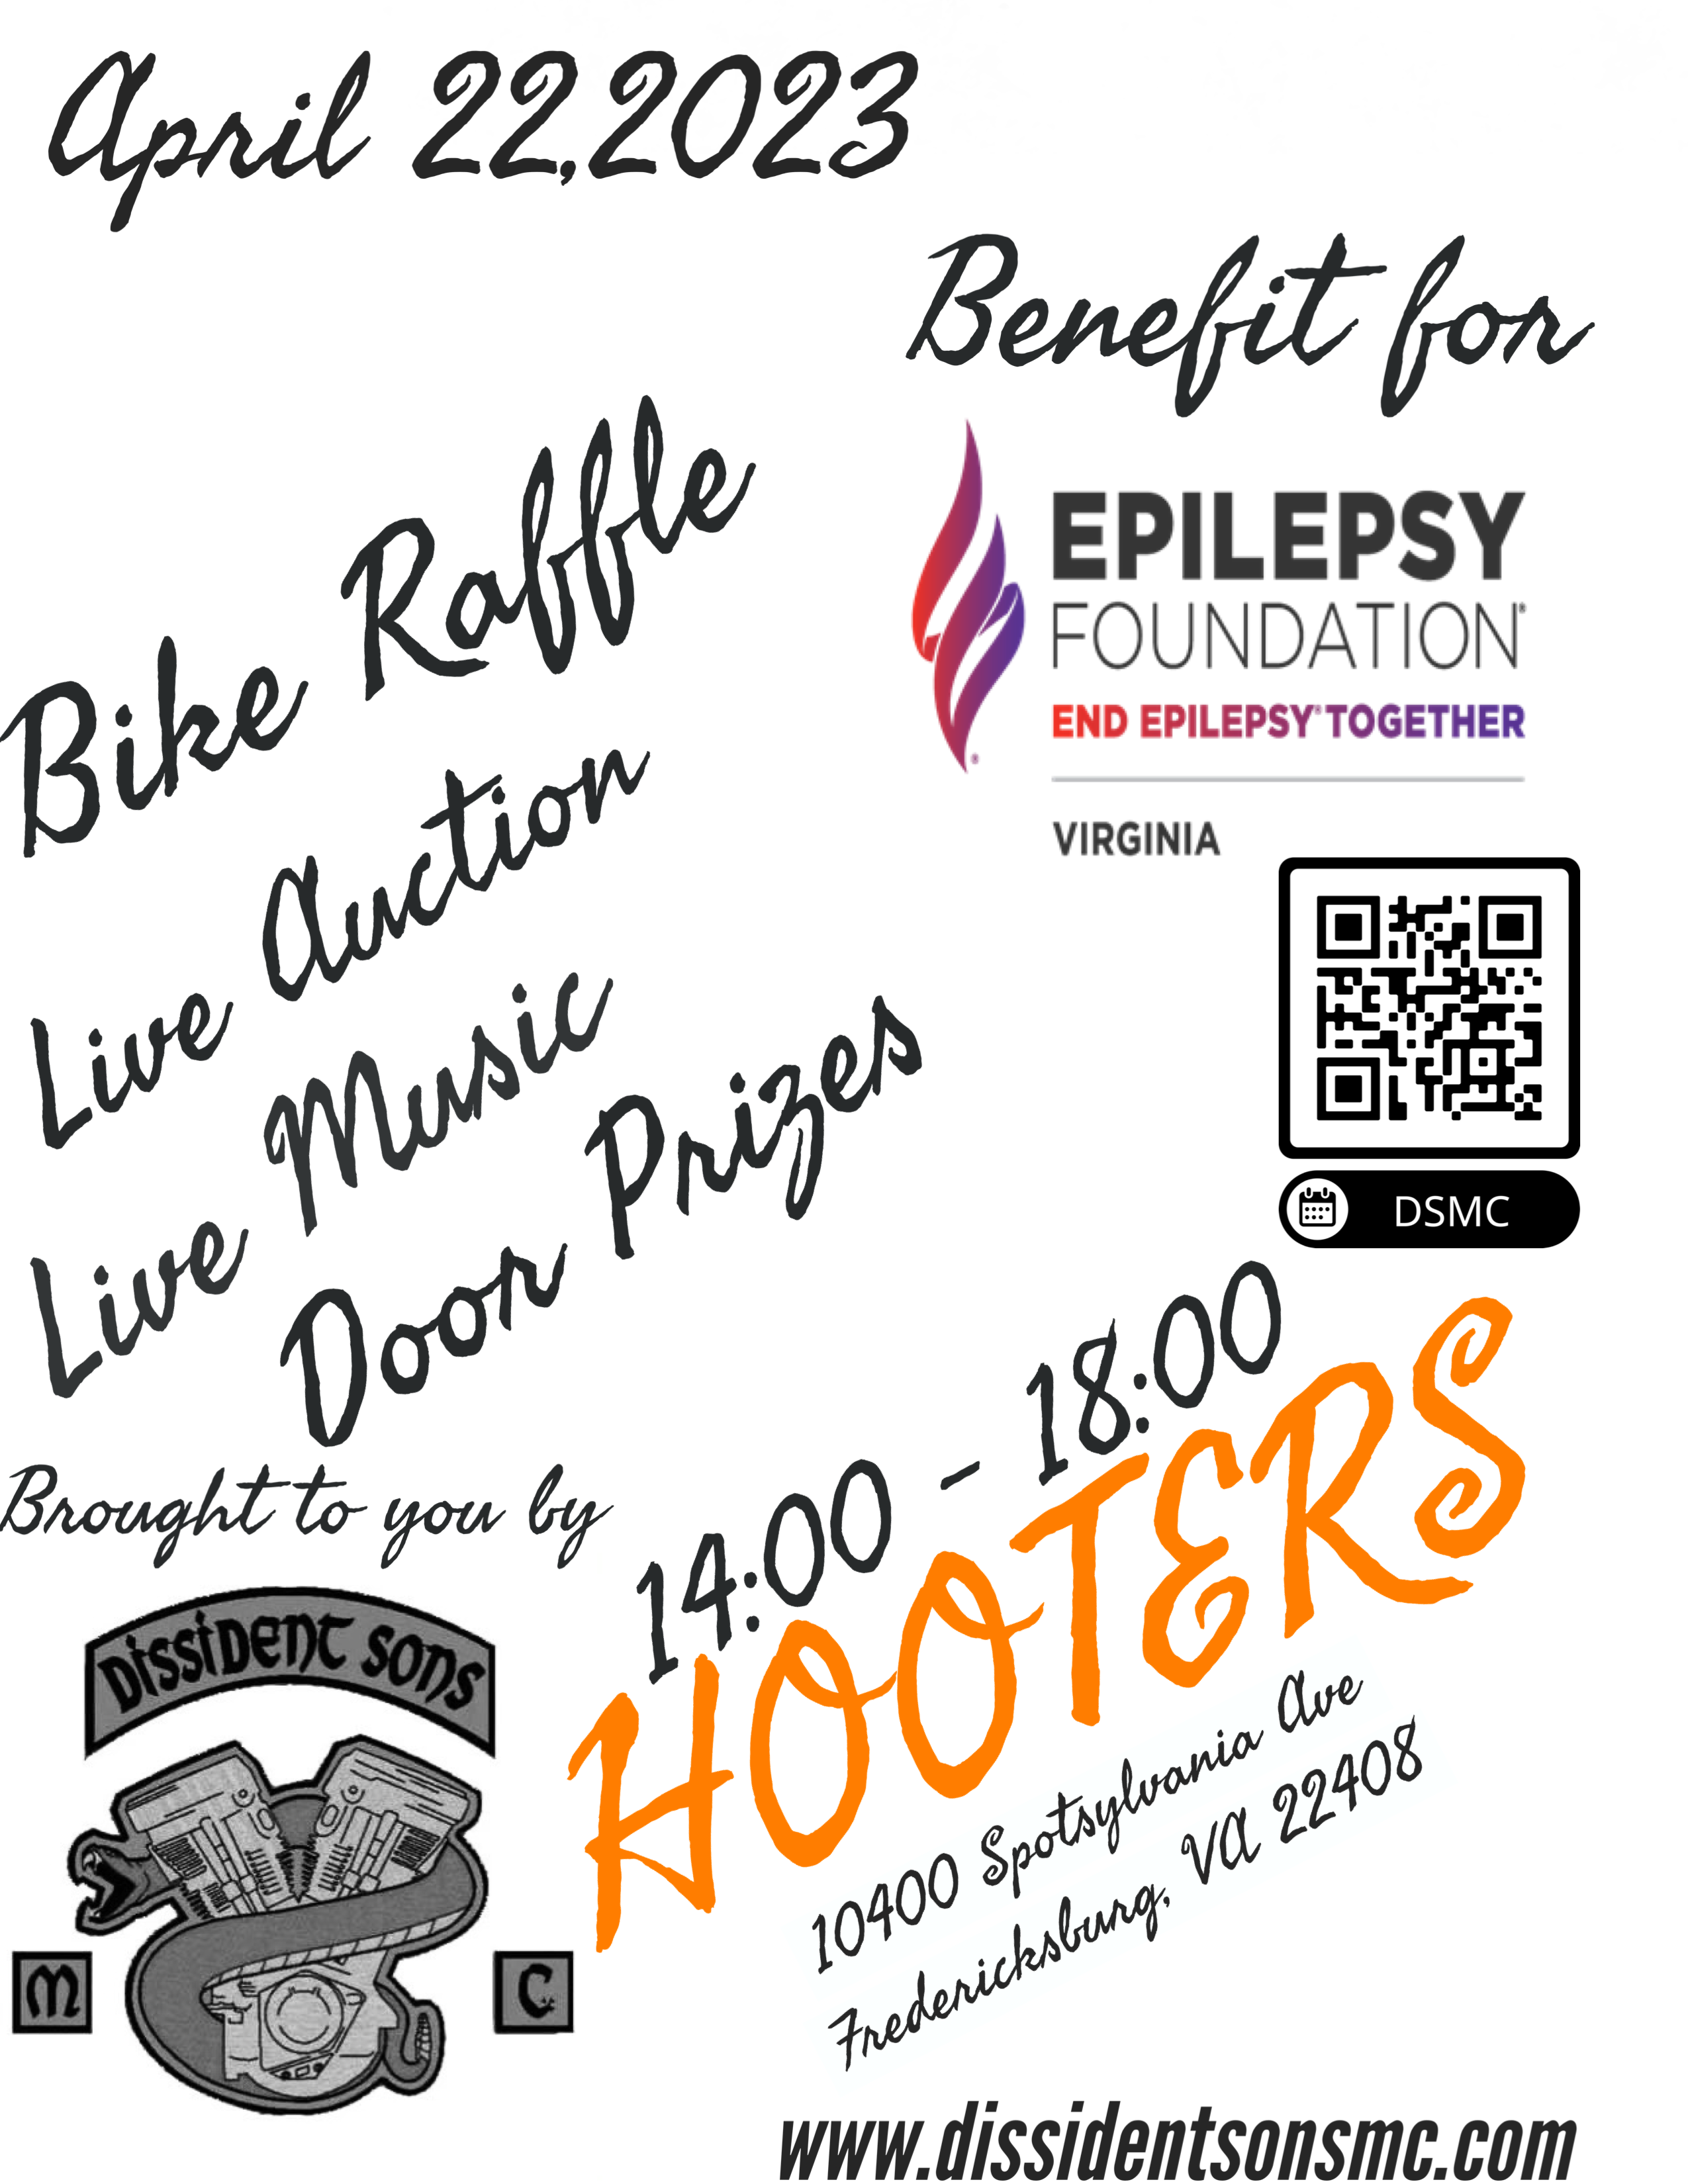 <h1 class="tribe-events-single-event-title">Epilepsy Foundation charity event</h1>